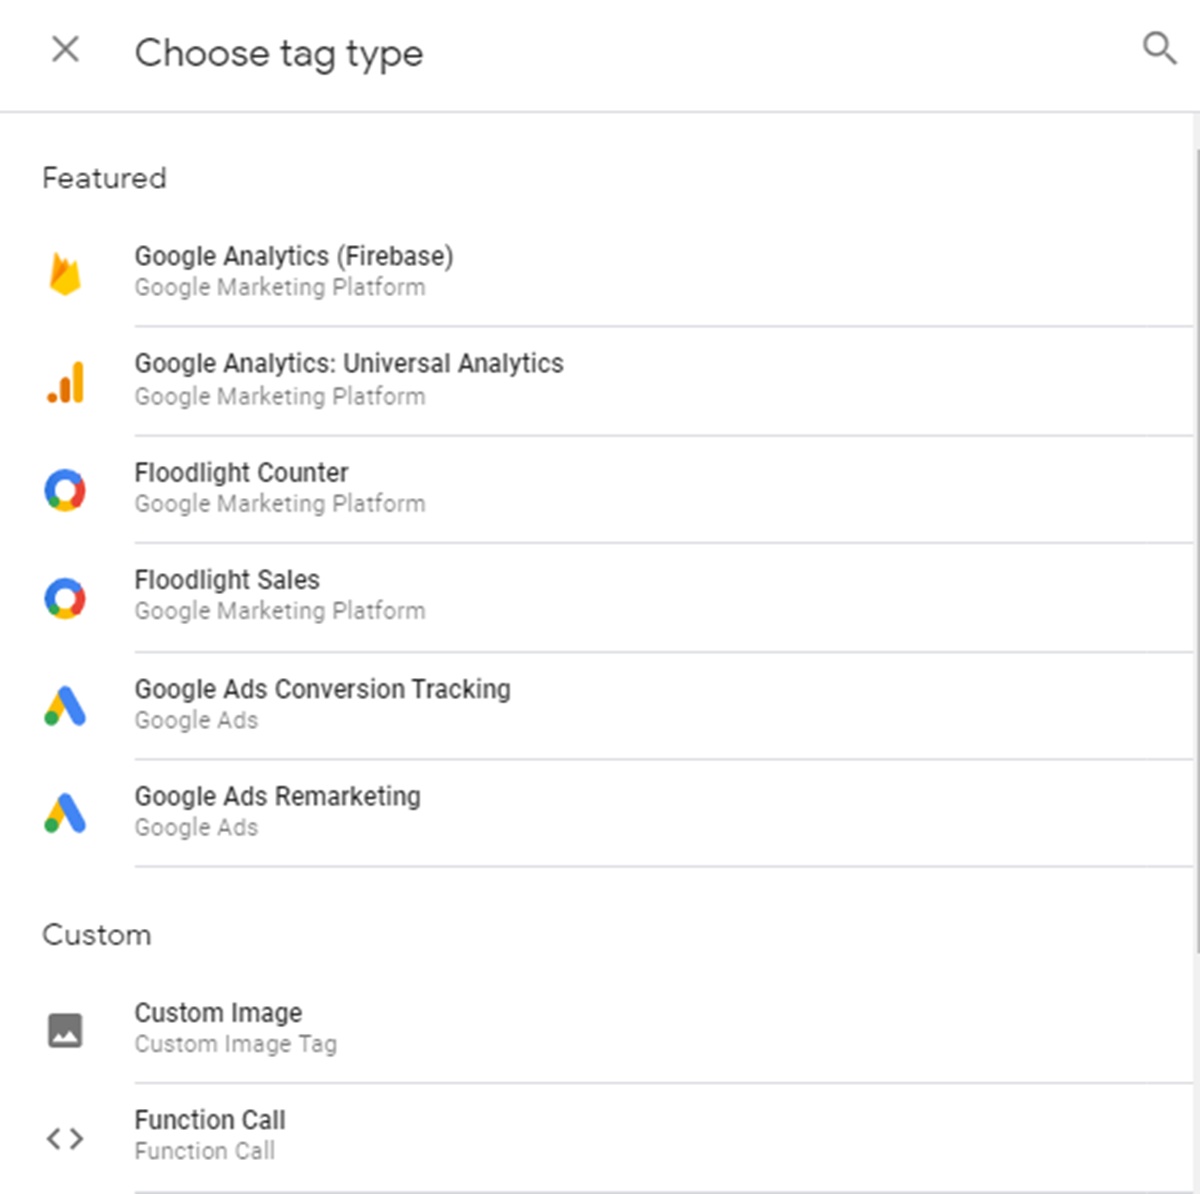 How to set up Google Tag Manager: Choose a tag type